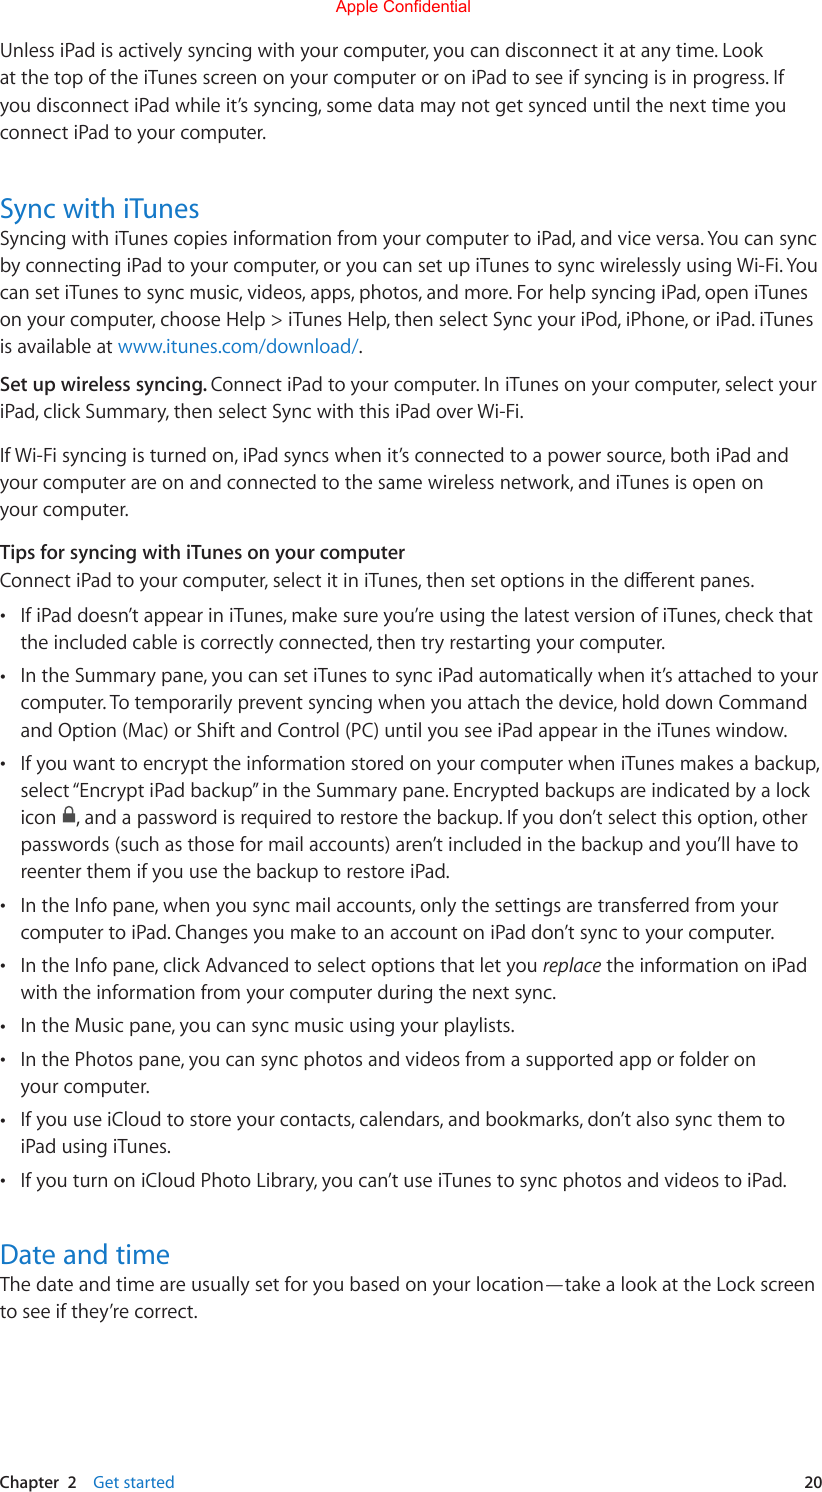 Chapter  2    Get started  20Unless iPad is actively syncing with your computer, you can disconnect it at any time. Look at the top of the iTunes screen on your computer or on iPad to see if syncing is in progress. If you disconnect iPad while it’s syncing, some data may not get synced until the next time you connect iPad to your computer. Sync with iTunesSyncing with iTunes copies information from your computer to iPad, and vice versa. You can sync by connecting iPad to your computer, or you can set up iTunes to sync wirelessly using Wi-Fi. You can set iTunes to sync music, videos, apps, photos, and more. For help syncing iPad, open iTunes on your computer, choose Help &gt; iTunes Help, then select Sync your iPod, iPhone, or iPad. iTunes is available at www.itunes.com/download/.Set up wireless syncing. Connect iPad to your computer. In iTunes on your computer, select your iPad, click Summary, then select Sync with this iPad over Wi-Fi.If Wi-Fi syncing is turned on, iPad syncs when it’s connected to a power source, both iPad and your computer are on and connected to the same wireless network, and iTunes is open on your computer.Tips for syncing with iTunes on your computerConnectiPadtoyourcomputer,selectitiniTunes,thensetoptionsinthedierentpanes. •If iPad doesn’t appear in iTunes, make sure you’re using the latest version of iTunes, check thatthe included cable is correctly connected, then try restarting your computer. •In the Summary pane, you can set iTunes to sync iPad automatically when it’s attached to yourcomputer. To temporarily prevent syncing when you attach the device, hold down Commandand Option (Mac) or Shift and Control (PC) until you see iPad appear in the iTunes window. •If you want to encrypt the information stored on your computer when iTunes makes a backup,select “Encrypt iPad backup” in the Summary pane. Encrypted backups are indicated by a lockicon  , and a password is required to restore the backup. If you don’t select this option, otherpasswords (such as those for mail accounts) aren’t included in the backup and you’ll have toreenter them if you use the backup to restore iPad. •In the Info pane, when you sync mail accounts, only the settings are transferred from yourcomputer to iPad. Changes you make to an account on iPad don’t sync to your computer. •In the Info pane, click Advanced to select options that let you replace the information on iPadwith the information from your computer during the next sync. •In the Music pane, you can sync music using your playlists. •In the Photos pane, you can sync photos and videos from a supported app or folder onyour computer. •If you use iCloud to store your contacts, calendars, and bookmarks, don’t also sync them toiPad using iTunes. •If you turn on iCloud Photo Library, you can’t use iTunes to sync photos and videos to iPad.Date and timeThe date and time are usually set for you based on your location—take a look at the Lock screen to see if they’re correct.Apple Confidential